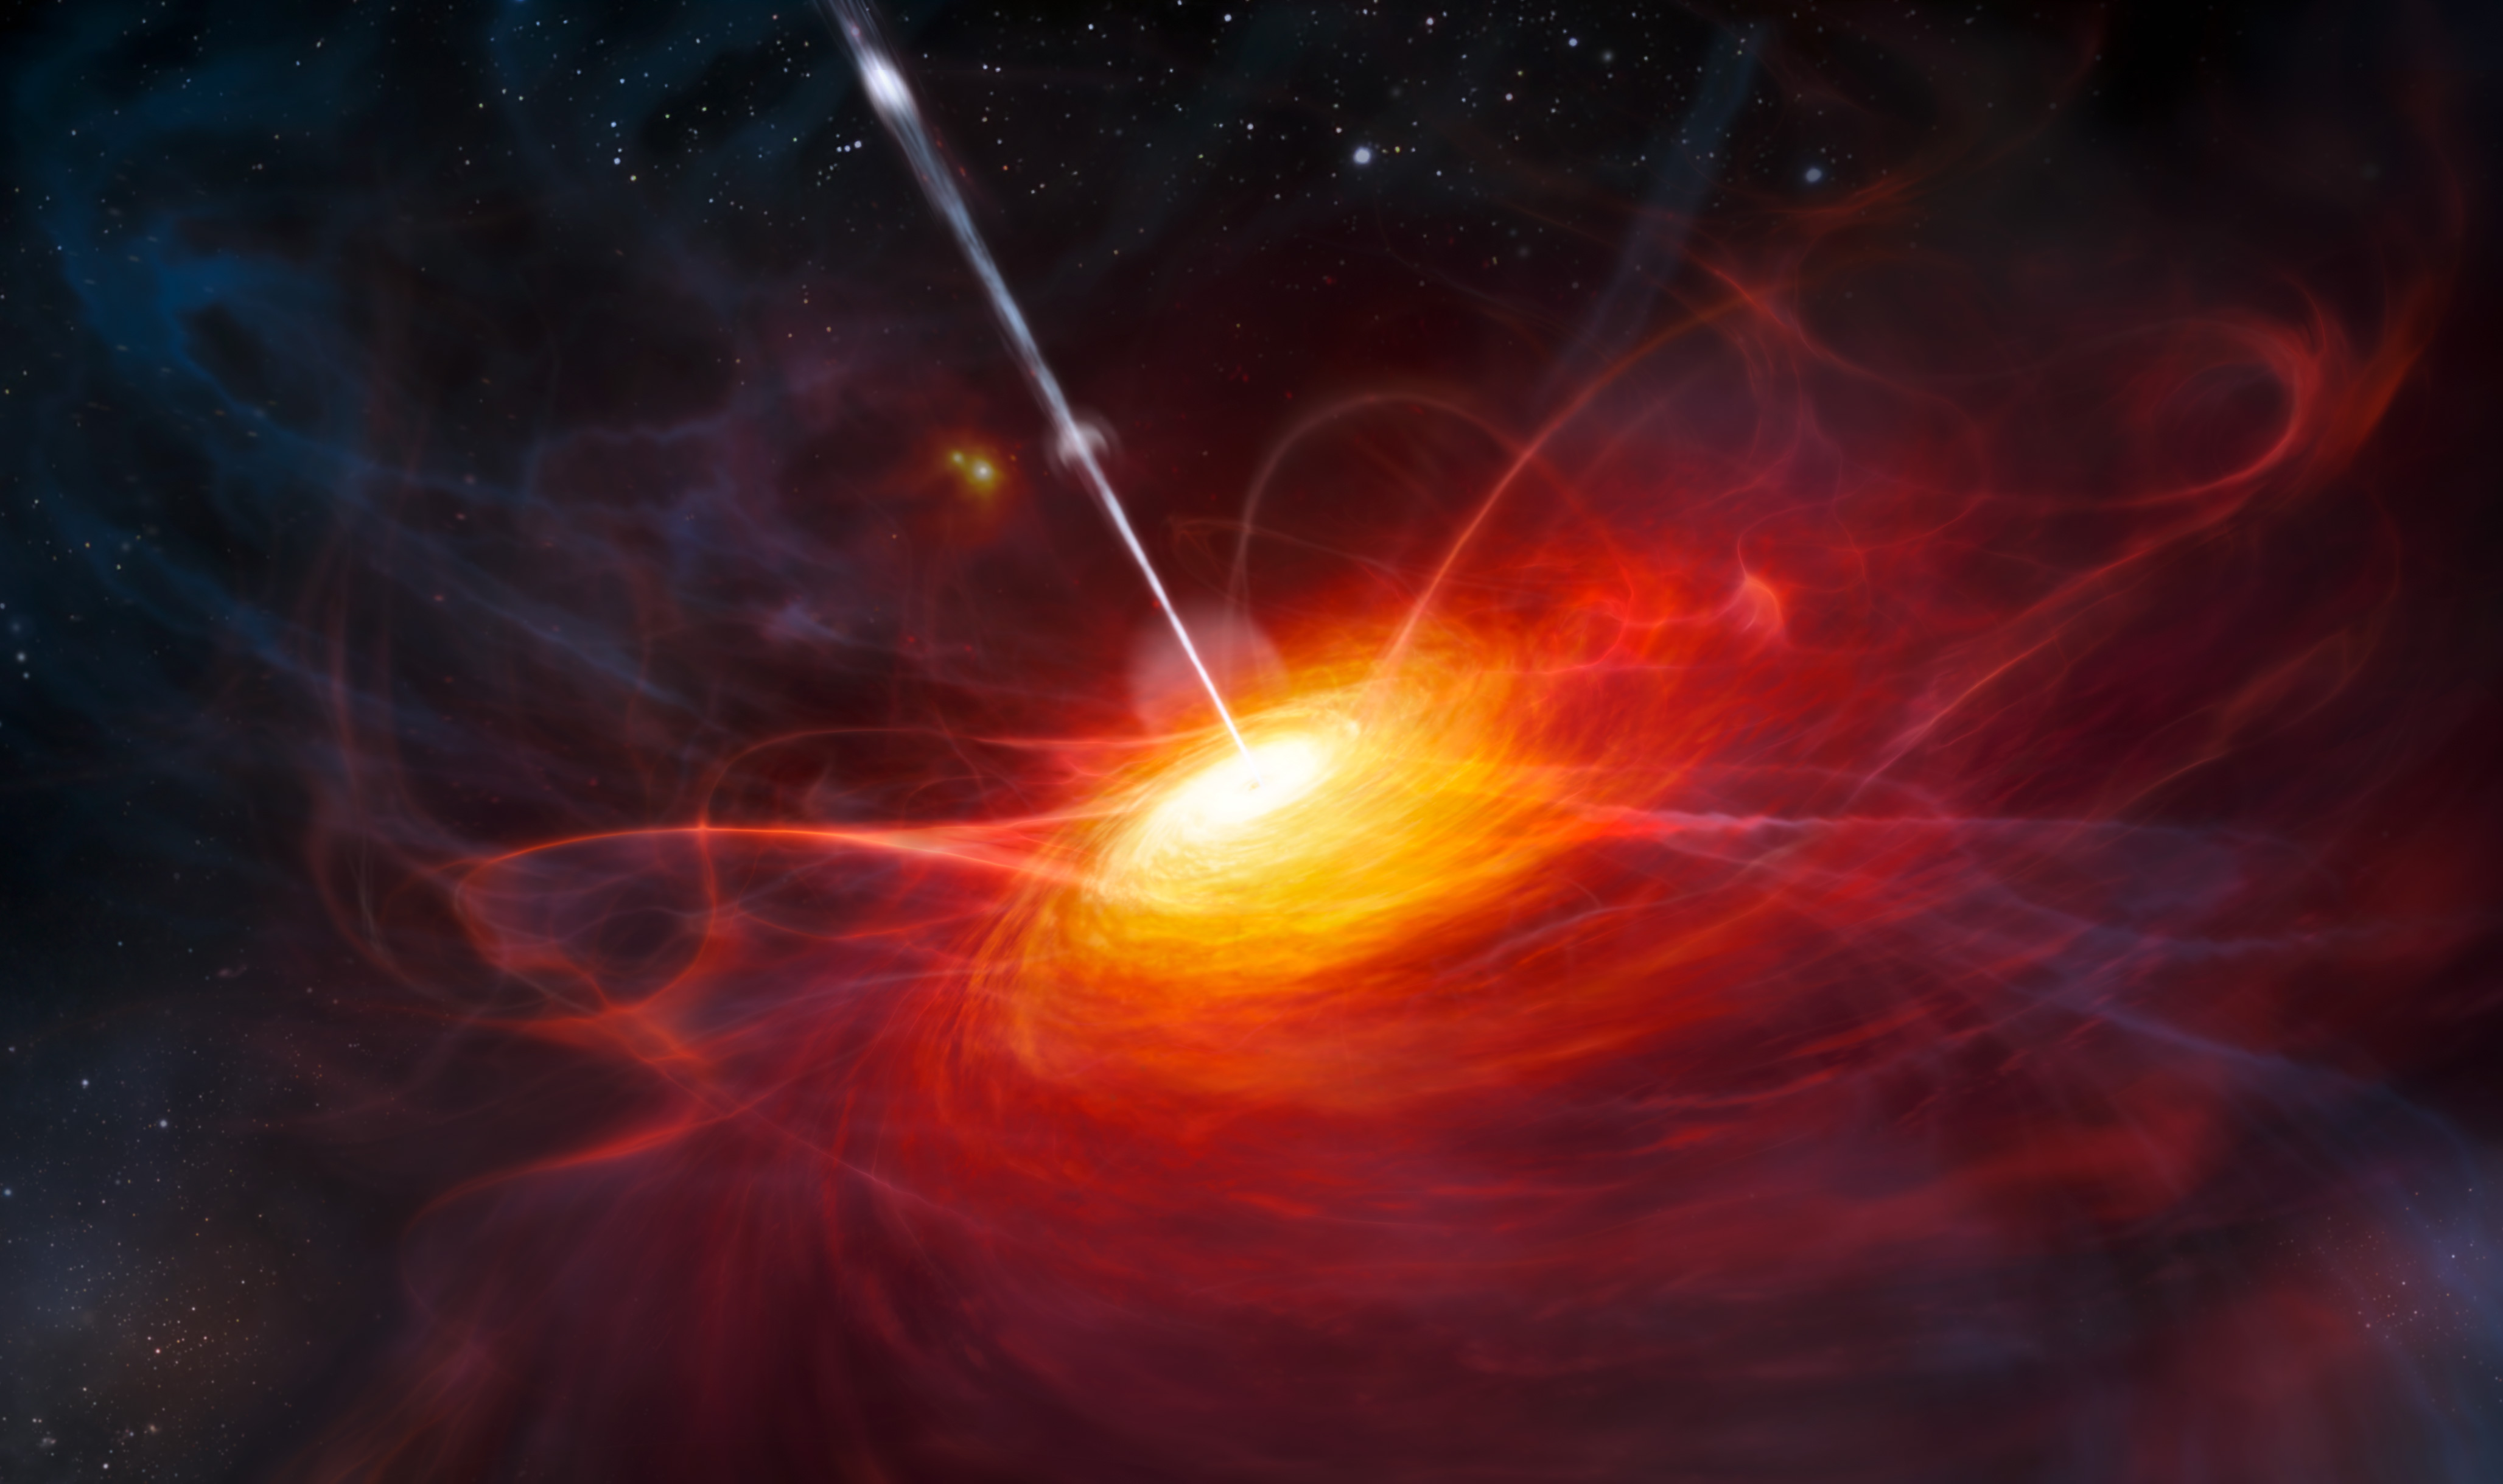 New space theory suggests that black holes may “spit” out the matter that falls into them